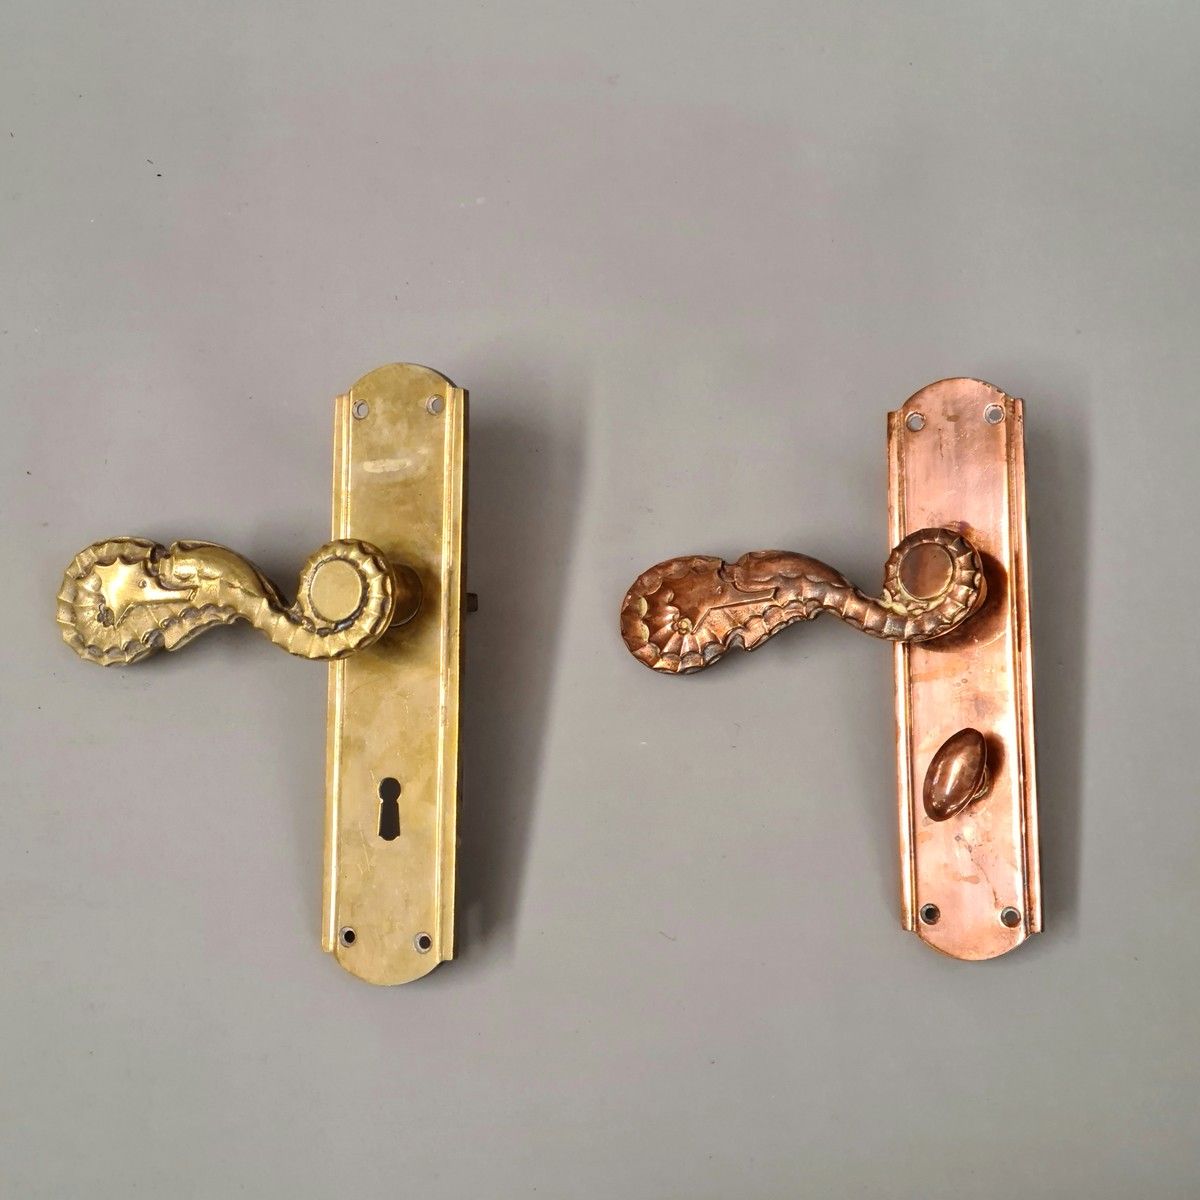 Null 2 DOOR HANDLES AND THEIR CLEANING PLATE Circa 1950 in brass and copper, the&hellip;